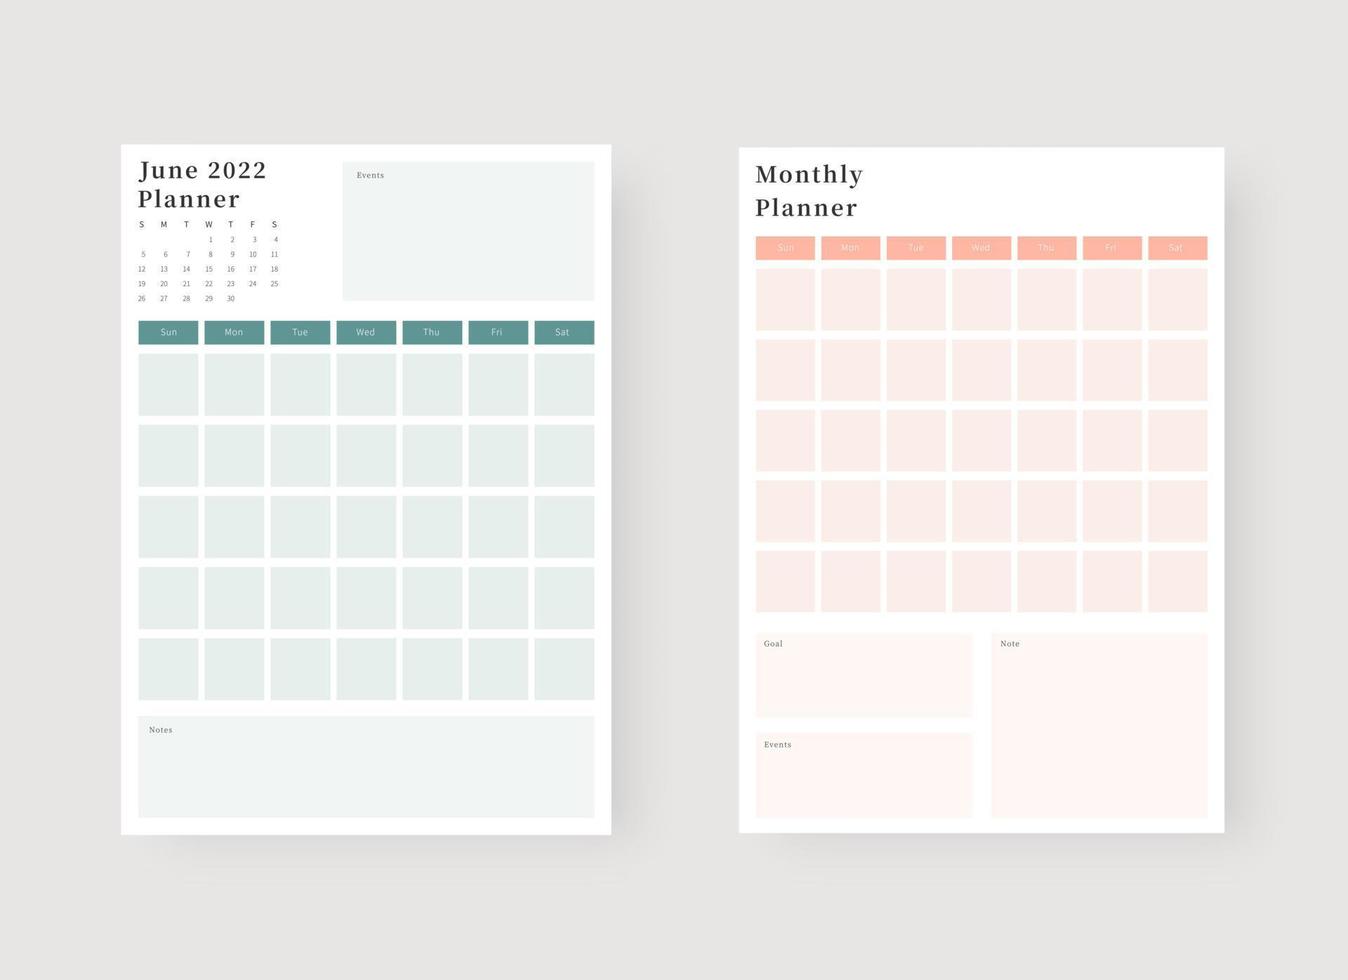 June 2022 planner template set. Set of planner and to do list. Monthly, weekly, daily planner template. Vector illustration.